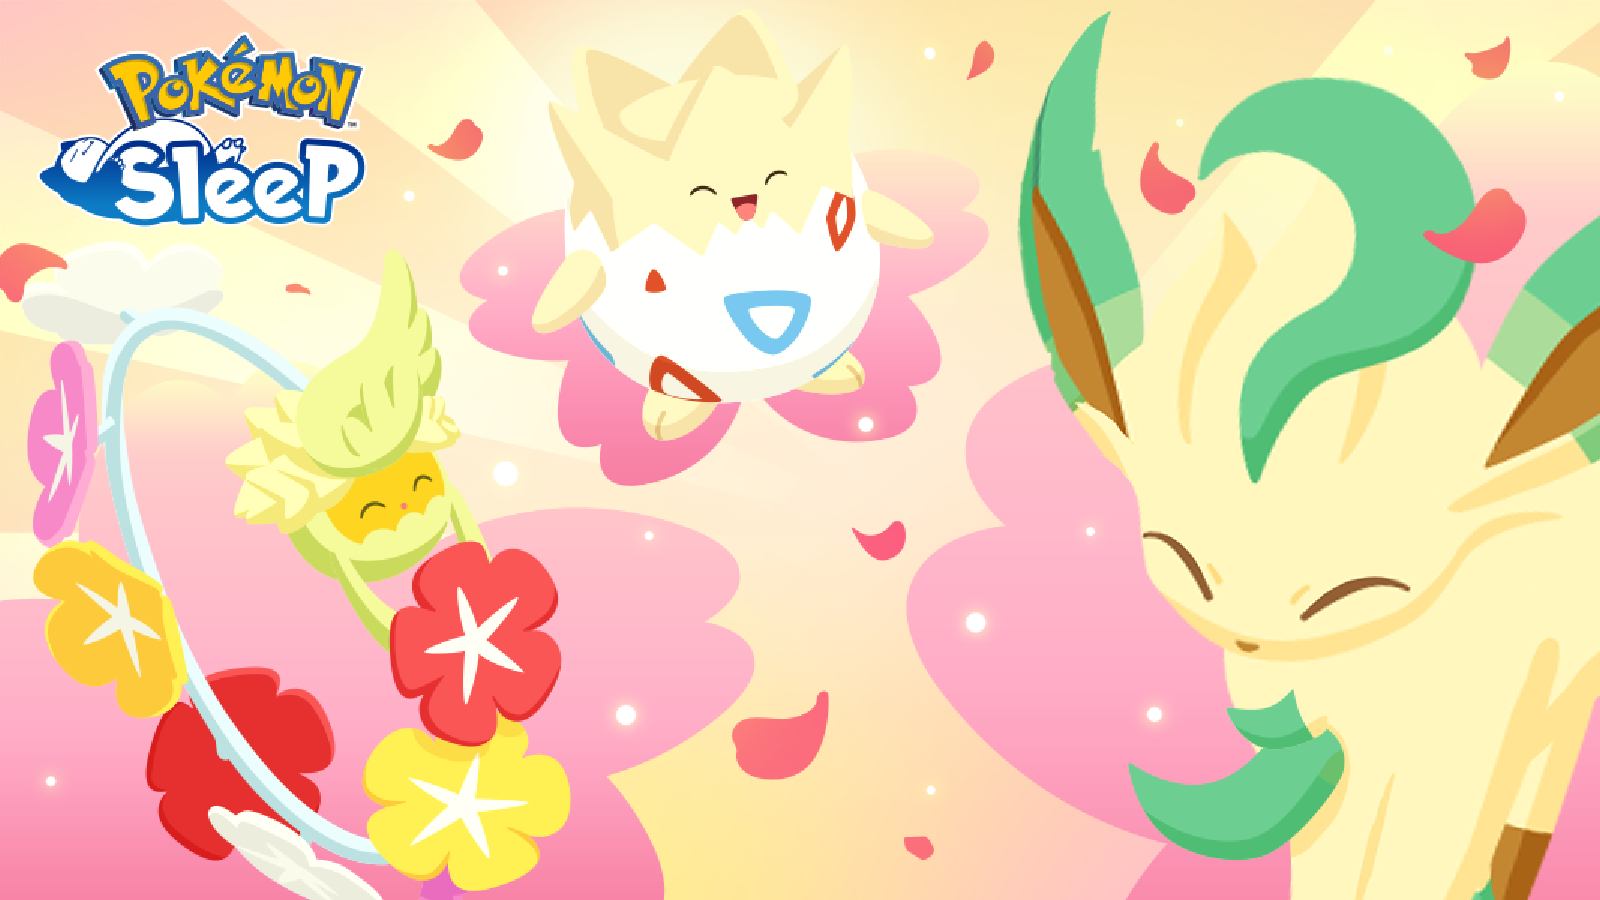 Key art for the Pokemon Sleep Flower Festival shows Comfey, Togepi, and Leafeon